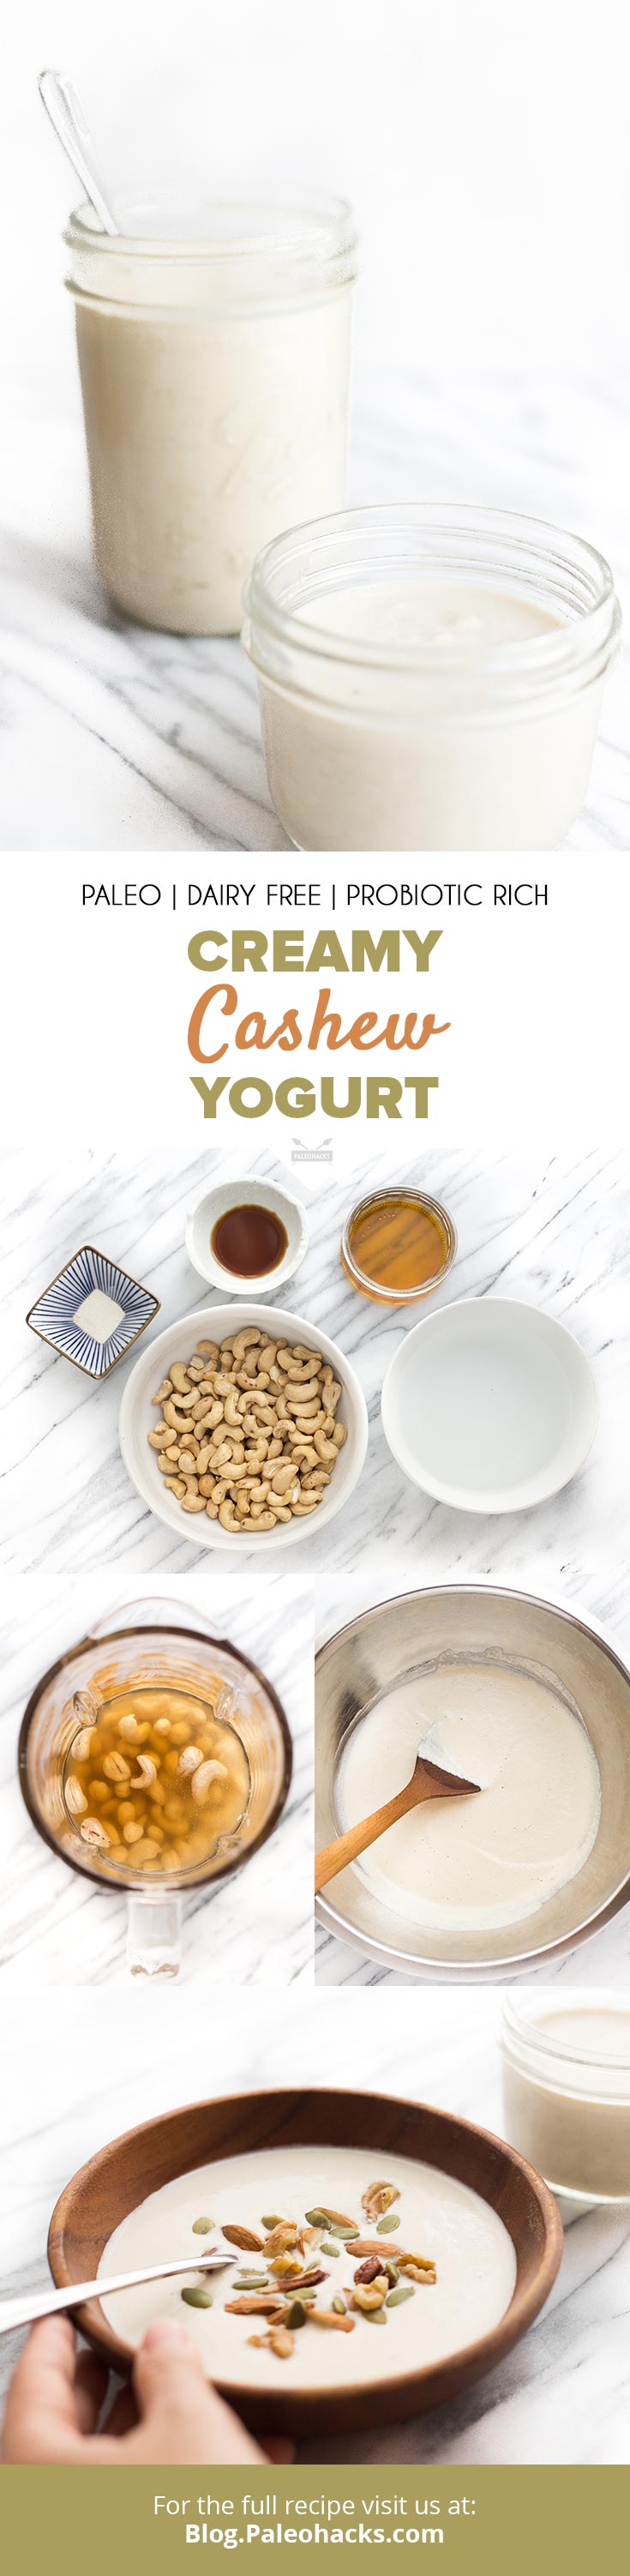 Blend cashews with honey, vanilla and probiotics and ferment overnight for a tangy, creamy, homemade cashew yogurt.